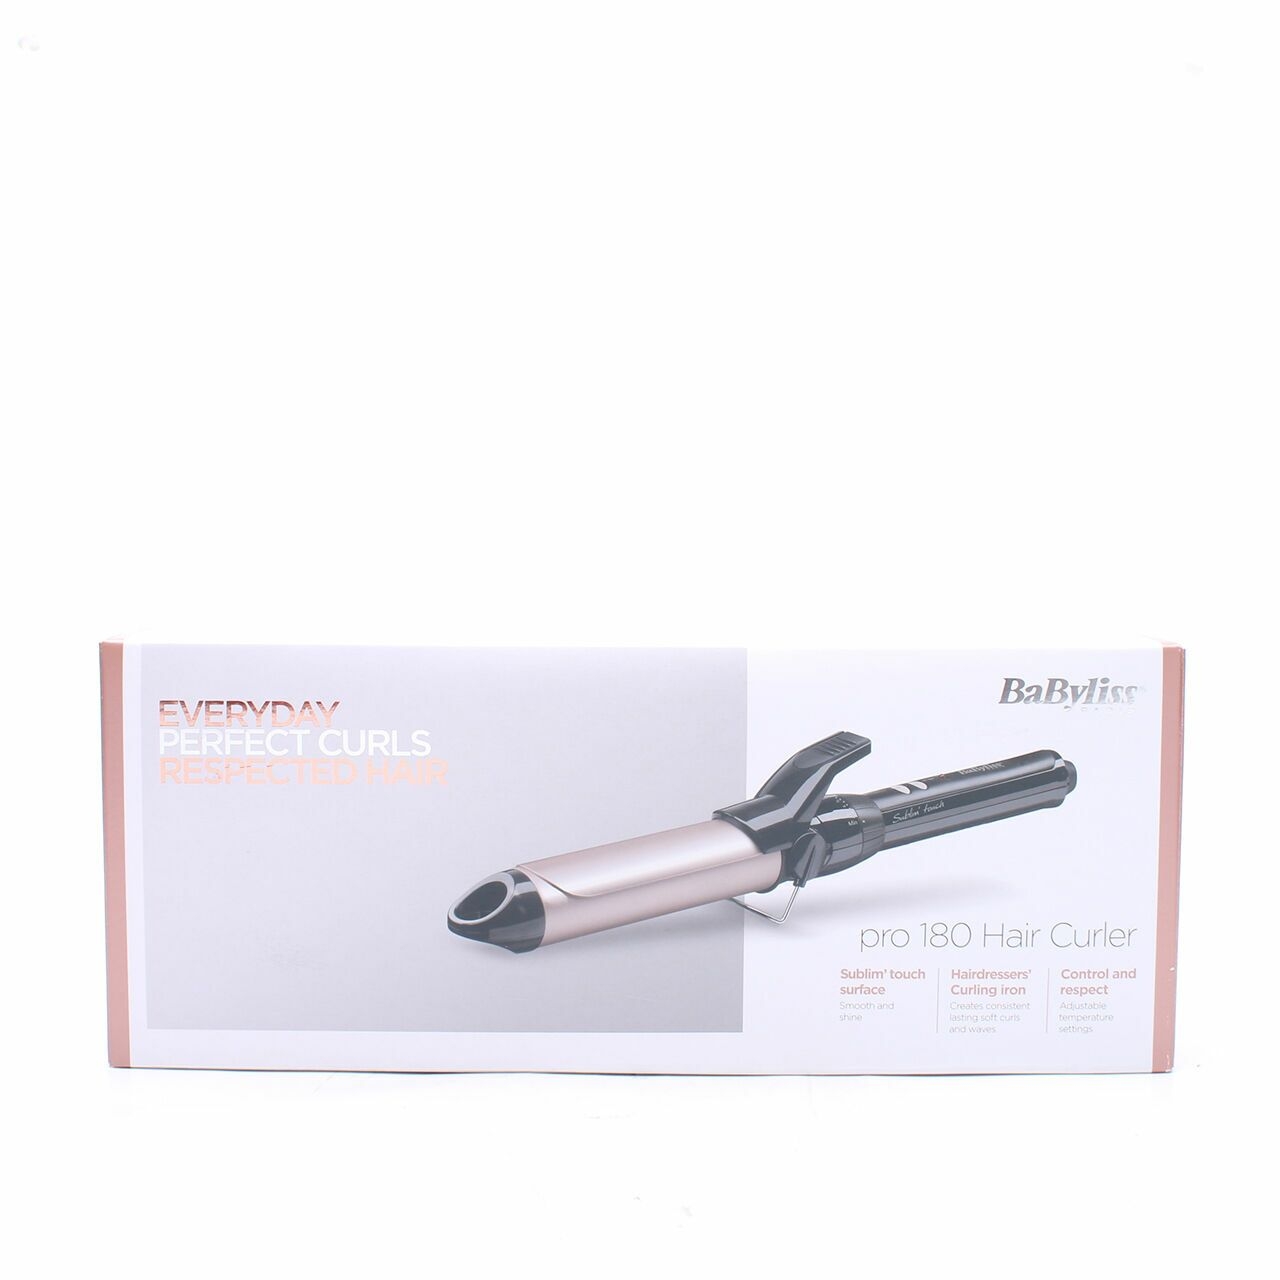 babyliss Black & Nude Pro 180 Hair Curler Tools